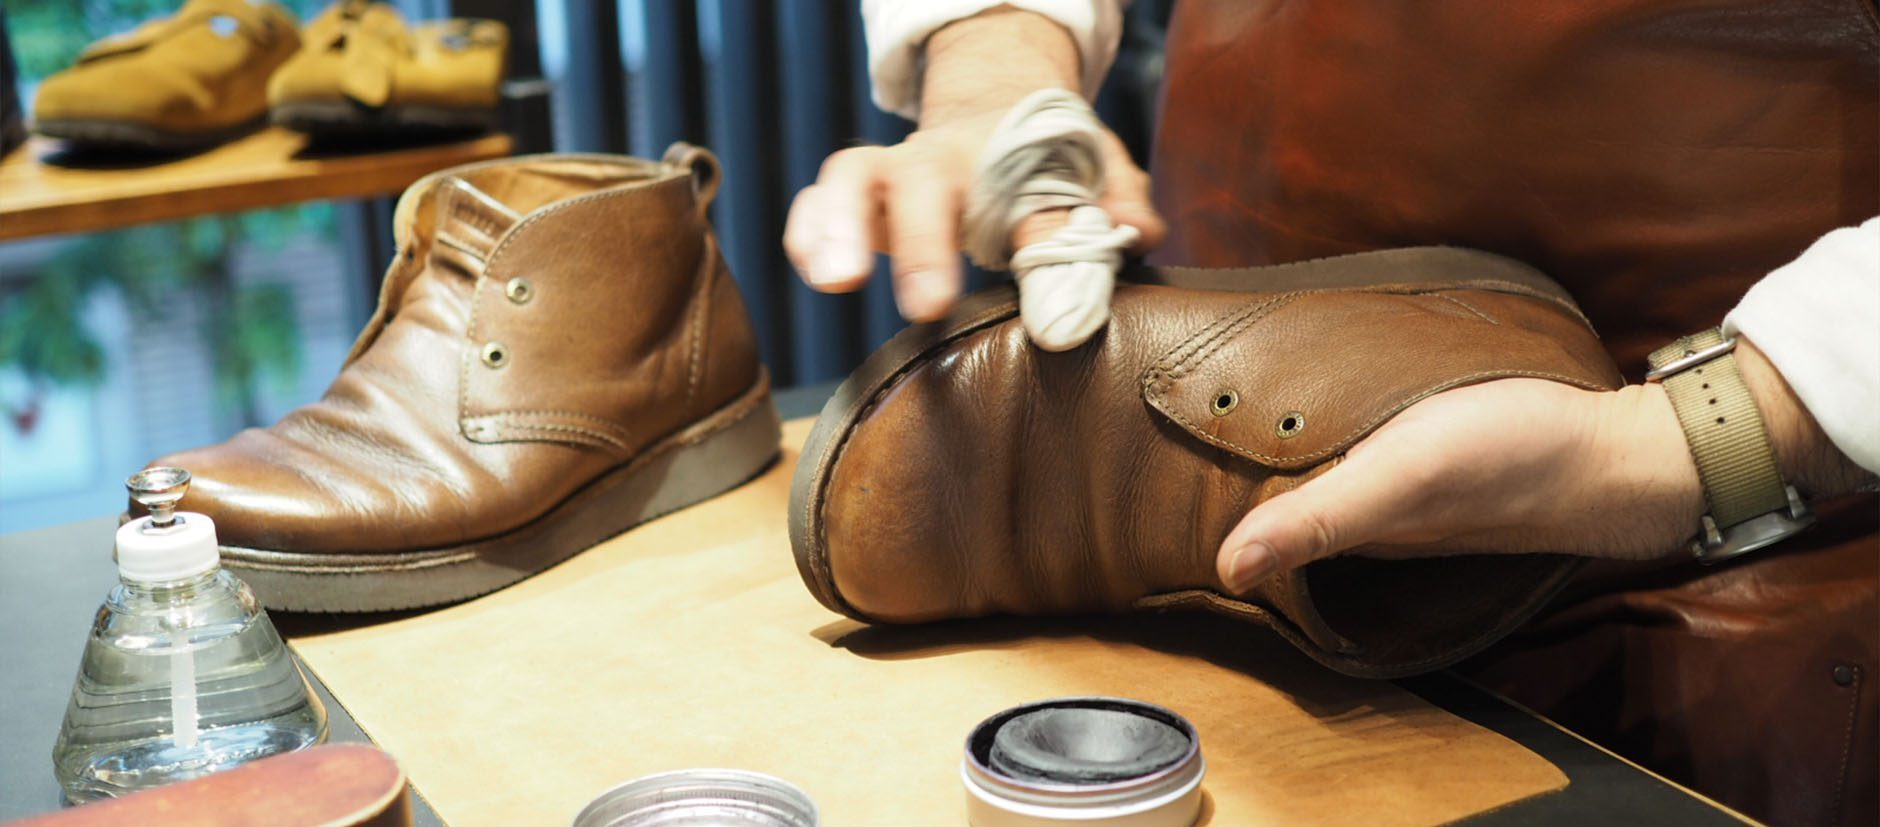 BENEXY staff performing shoe care on a pair of shoes, prolonging shoe life for health and fashion